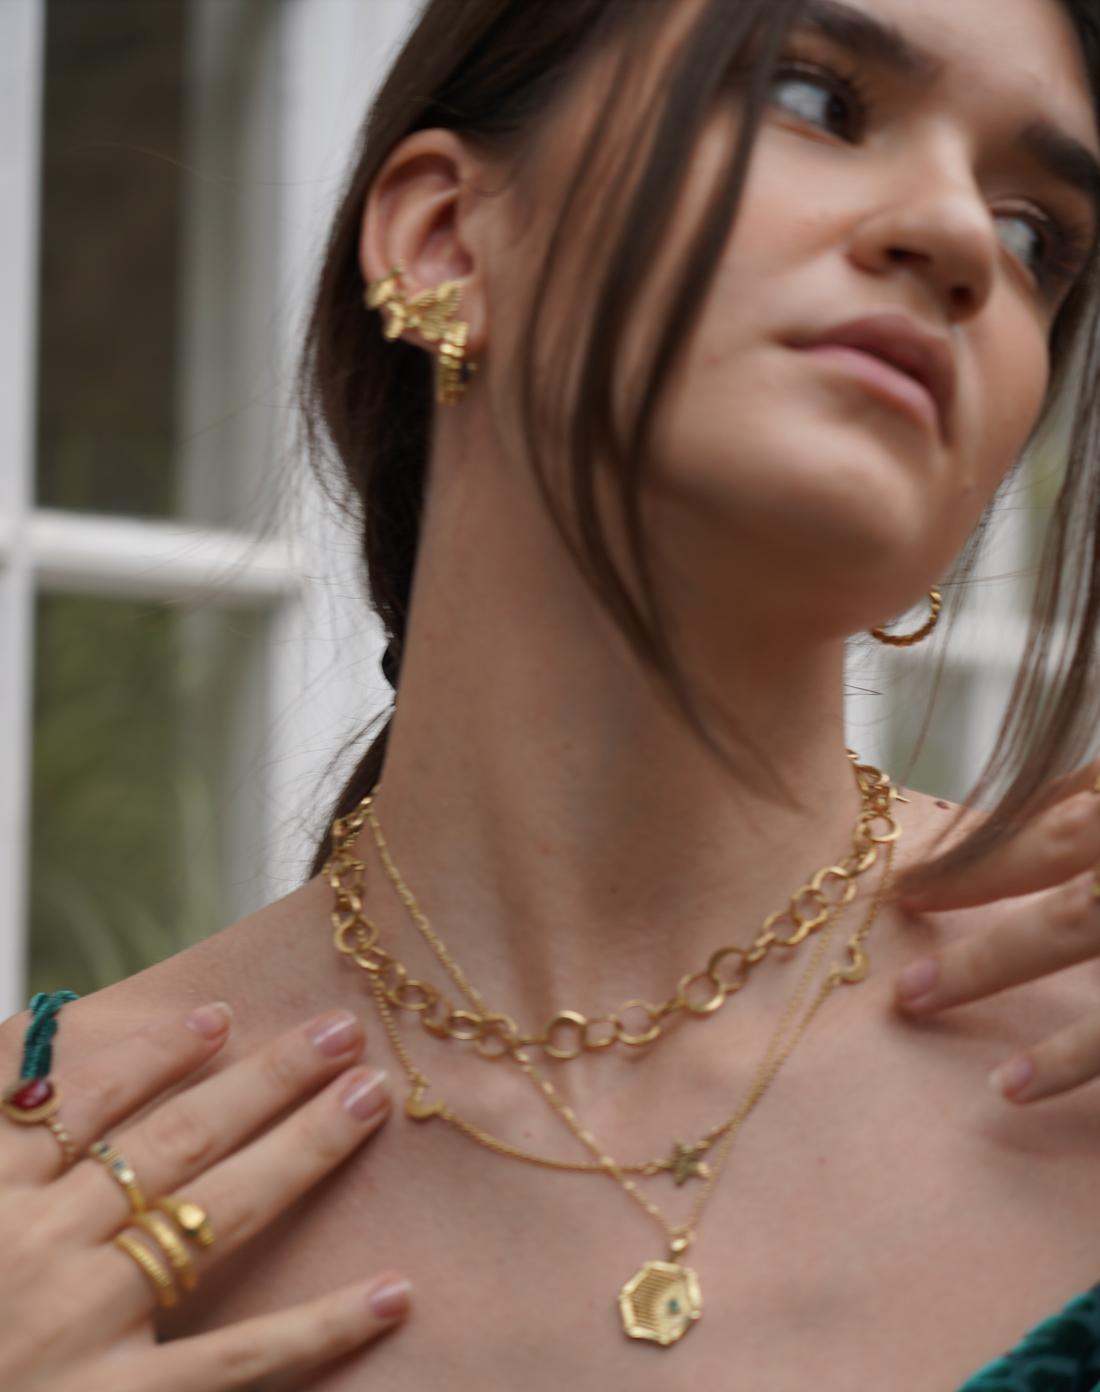 "Unlock Your Style: 4 Jewelry Trends to Elevate Your Look"